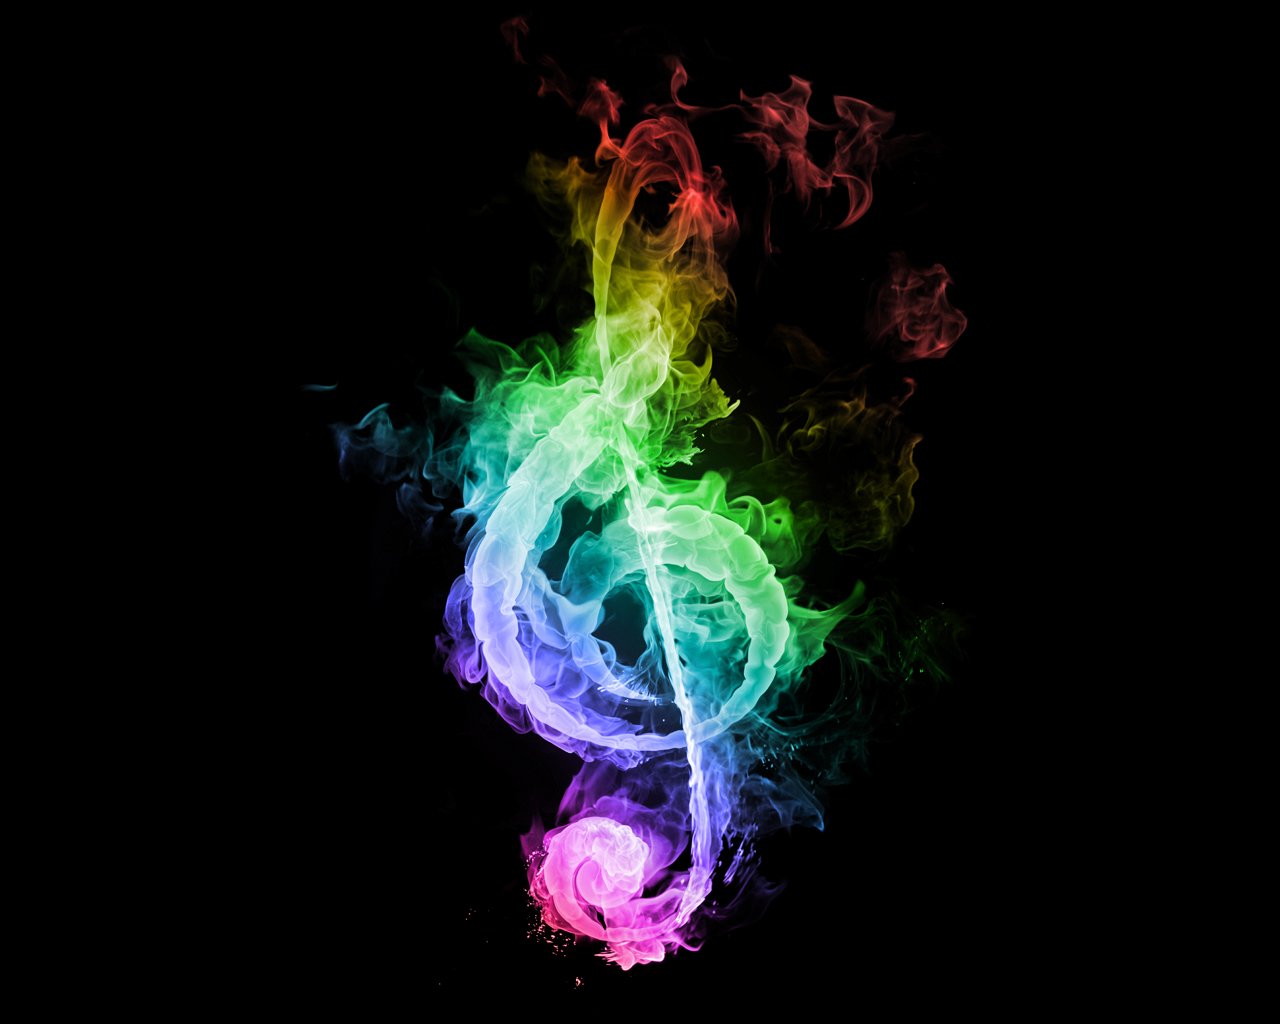 Abstract Wallpaper Flames Musical Note Music Jpg